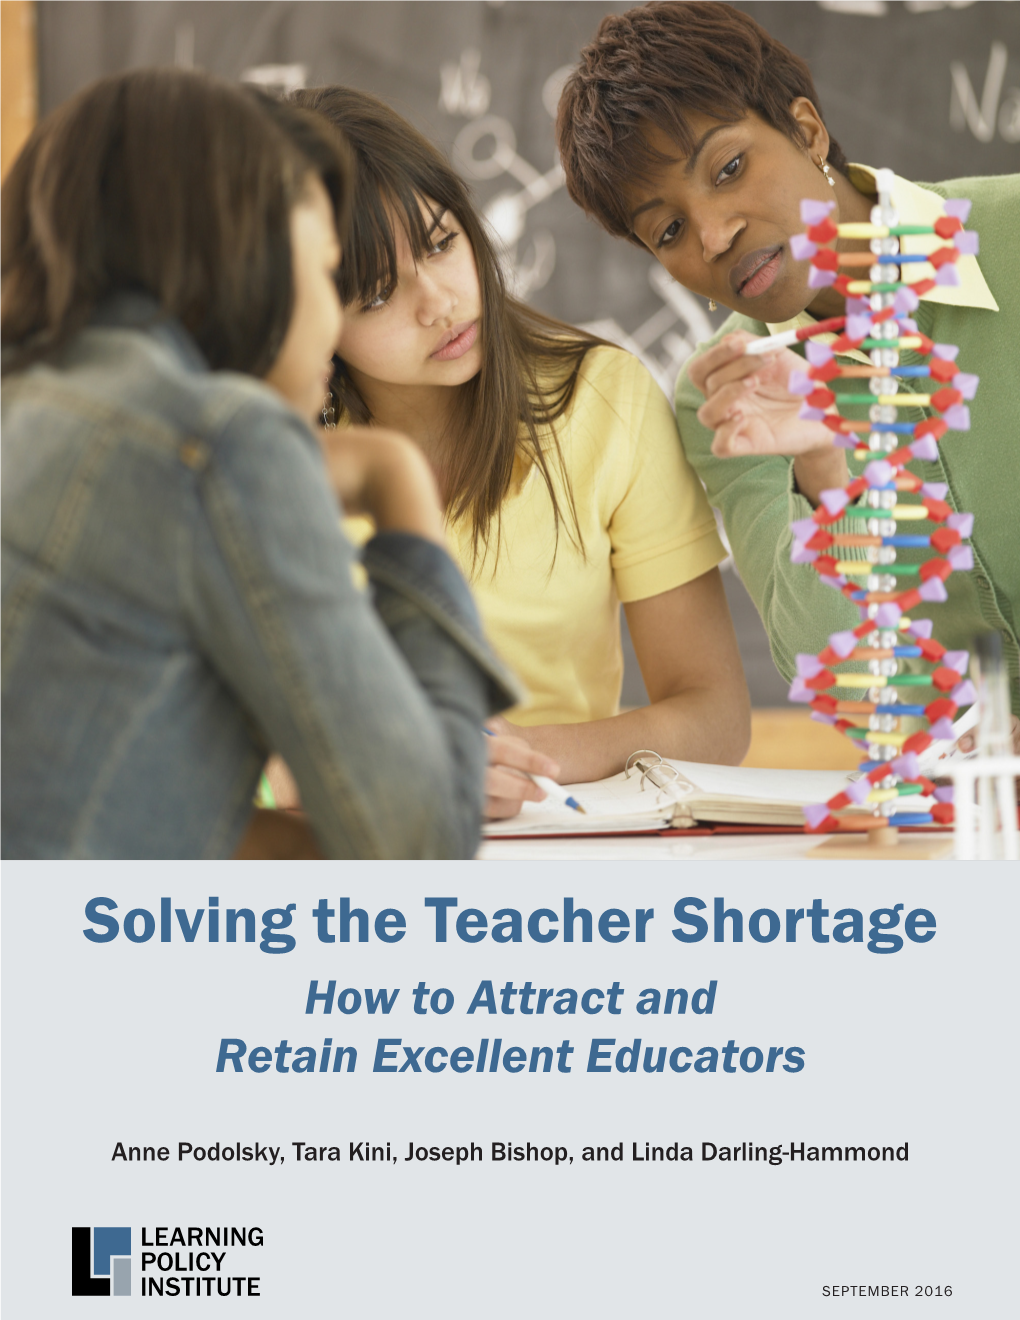 Solving the Teacher Shortage: How to Attract and Retain Excellent Educators